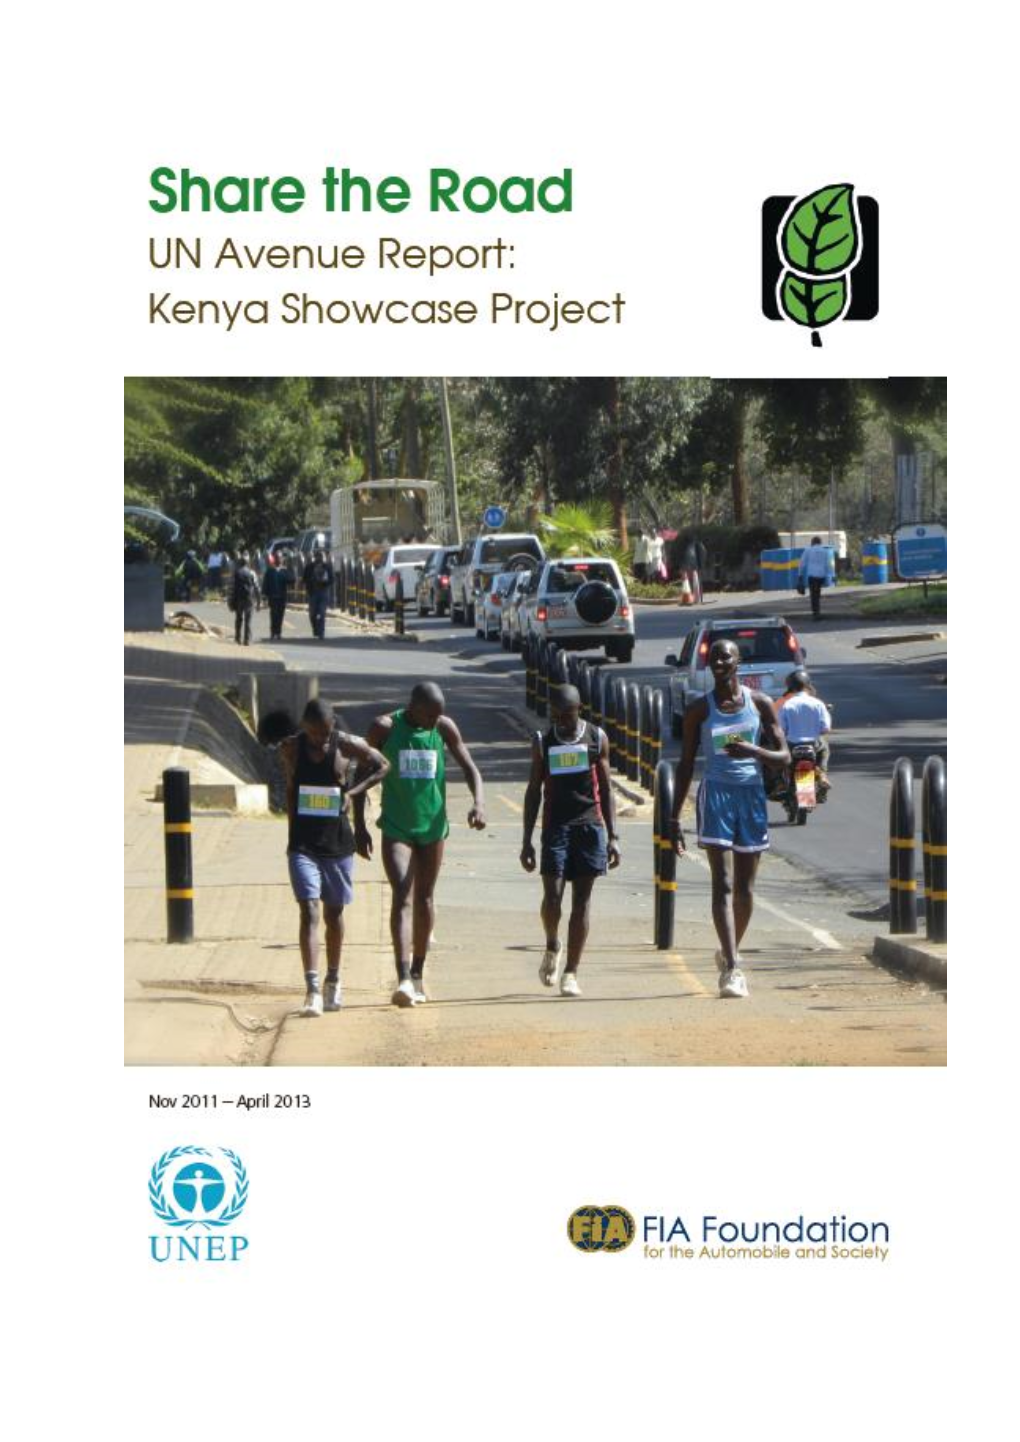 Un Avenue Report: Kenya Showcase Project for Share the Road